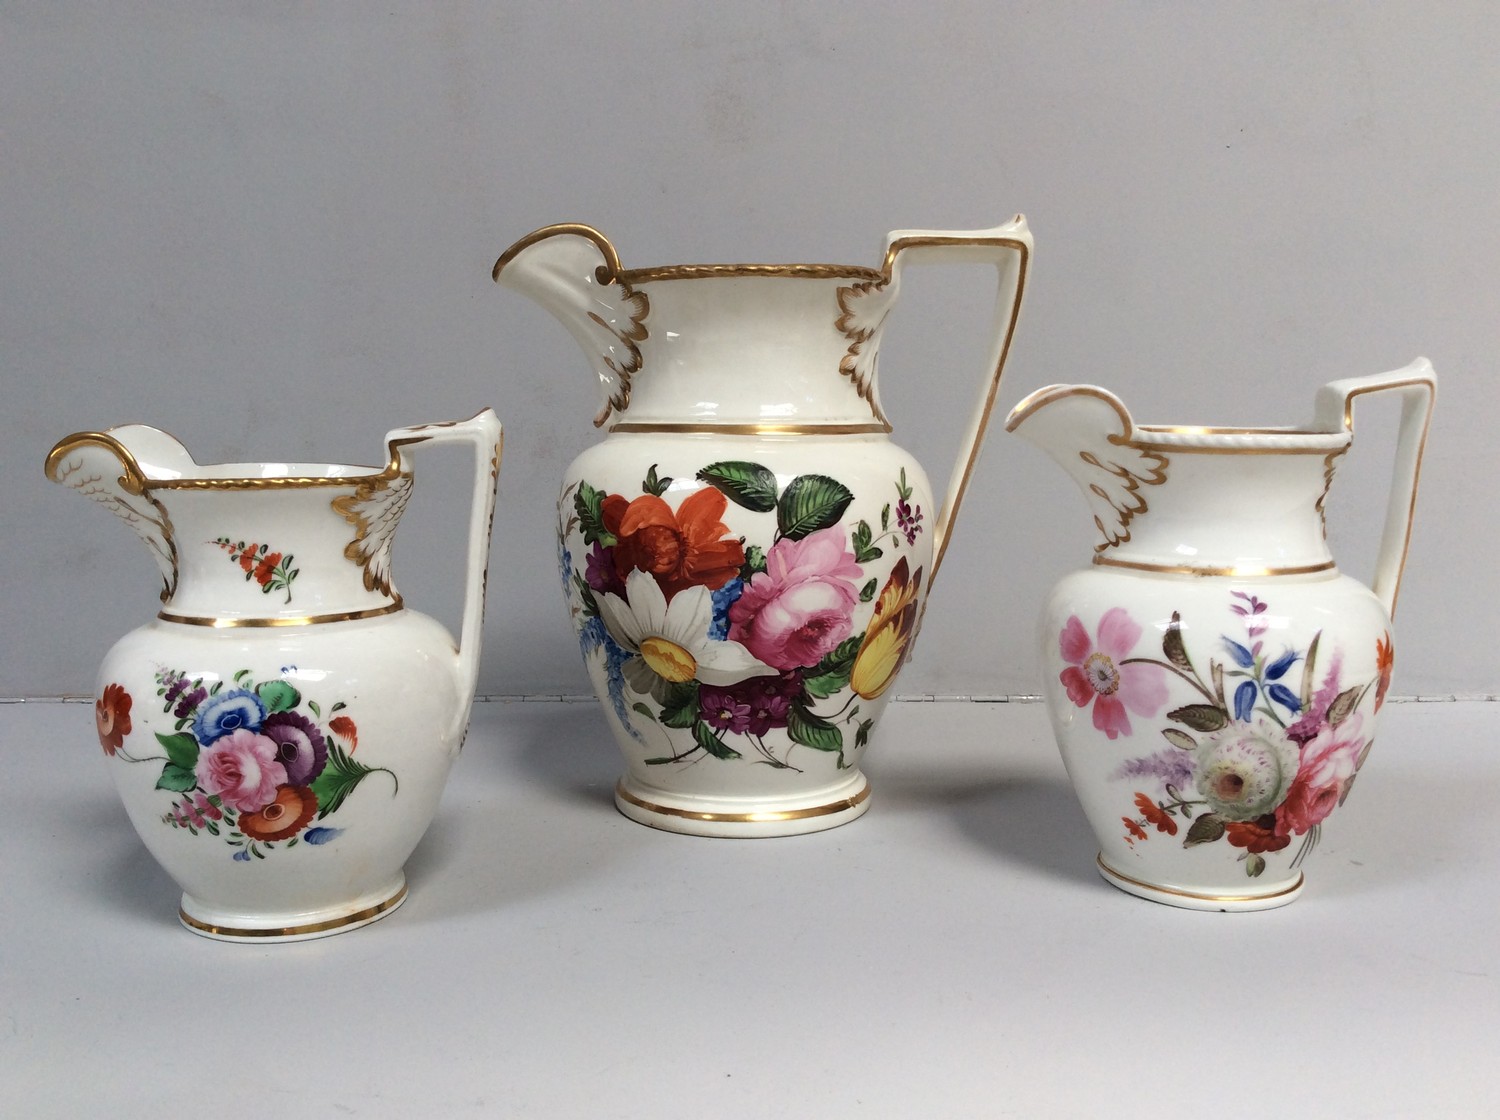 Three various early 19th century English porcelain jugs, probably Staffordshire, with ovoid body and